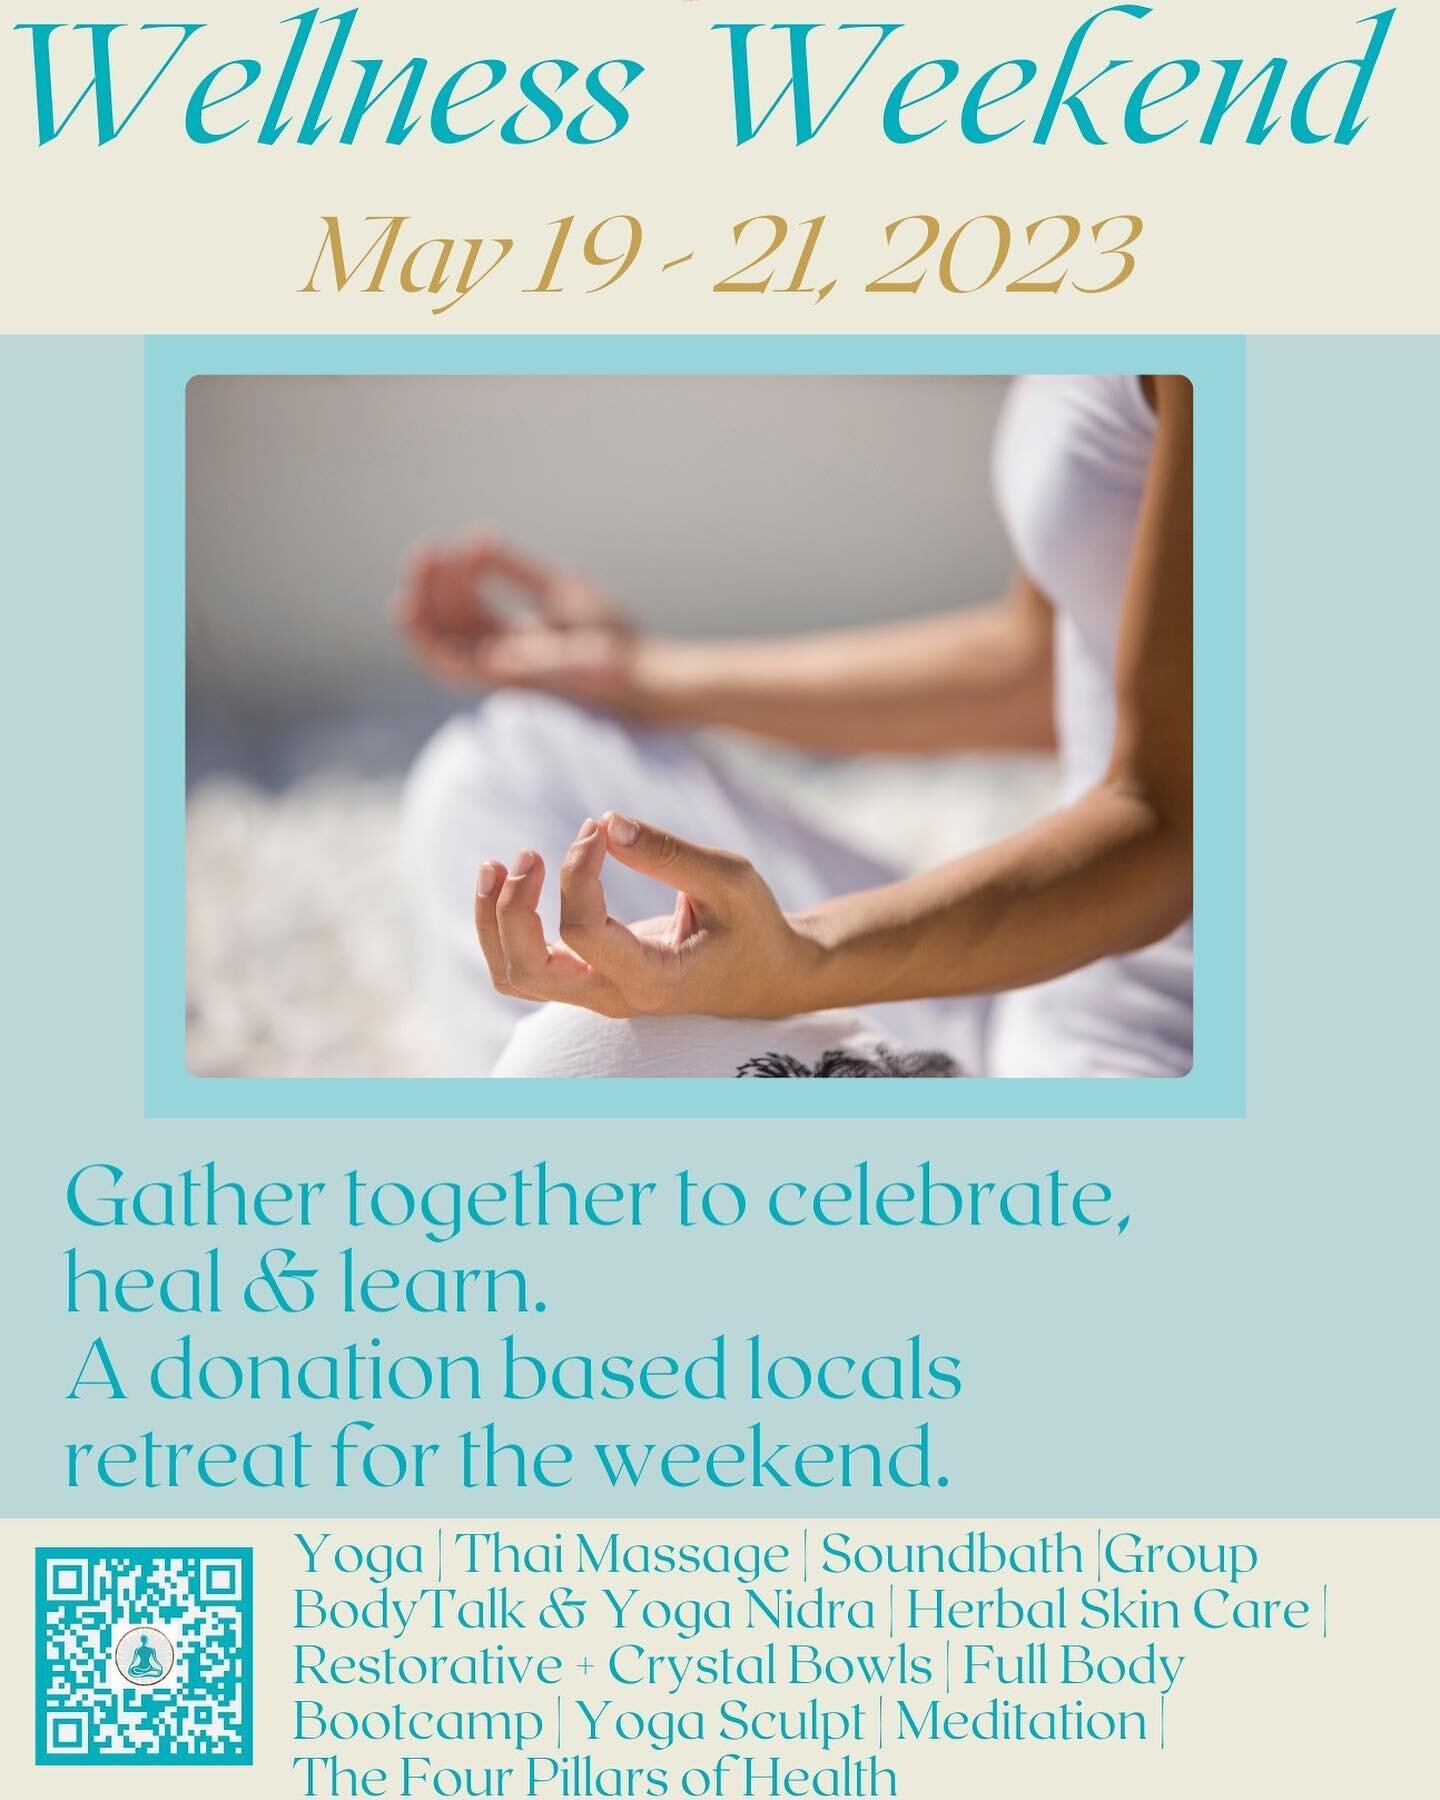 Begin Today. 

This weekend is an opportunity to find different modalities to help you on your journey. One year ago, Michelle decided to embark on the journey of making yoga and other healing modalities accessible to our community. 

Begin again, be